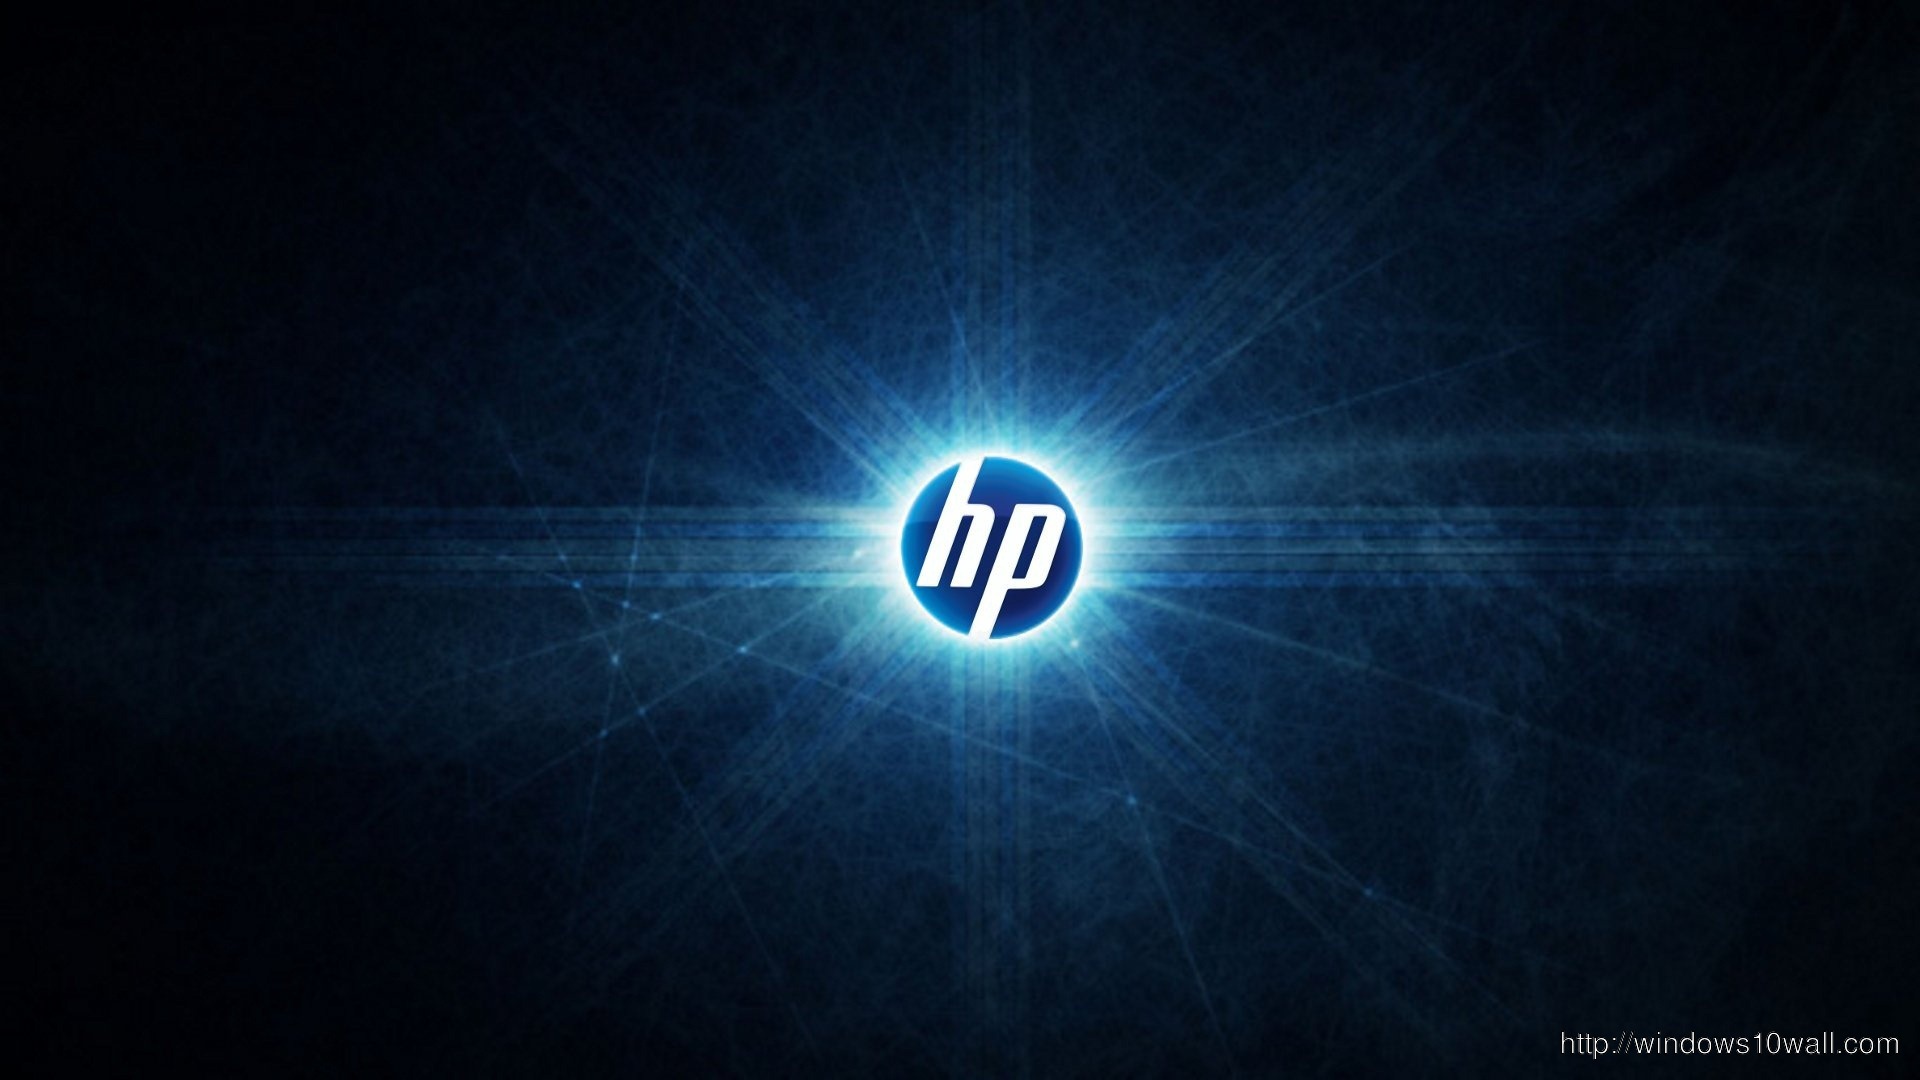 HP Background Wallpapers